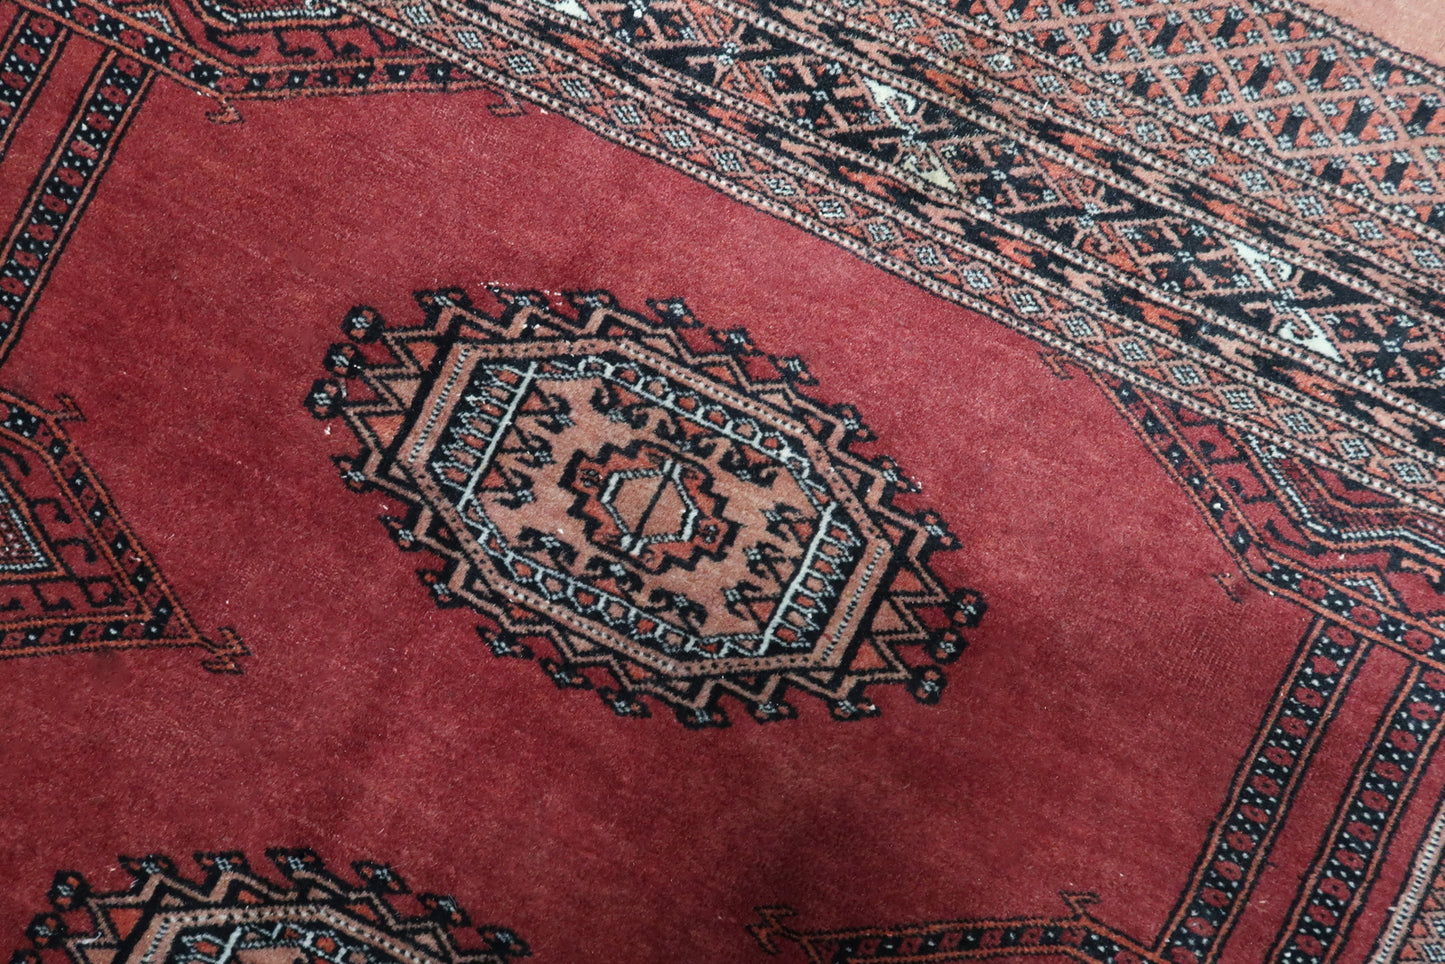 Detailed View of Rug's Ruby Red Patterns